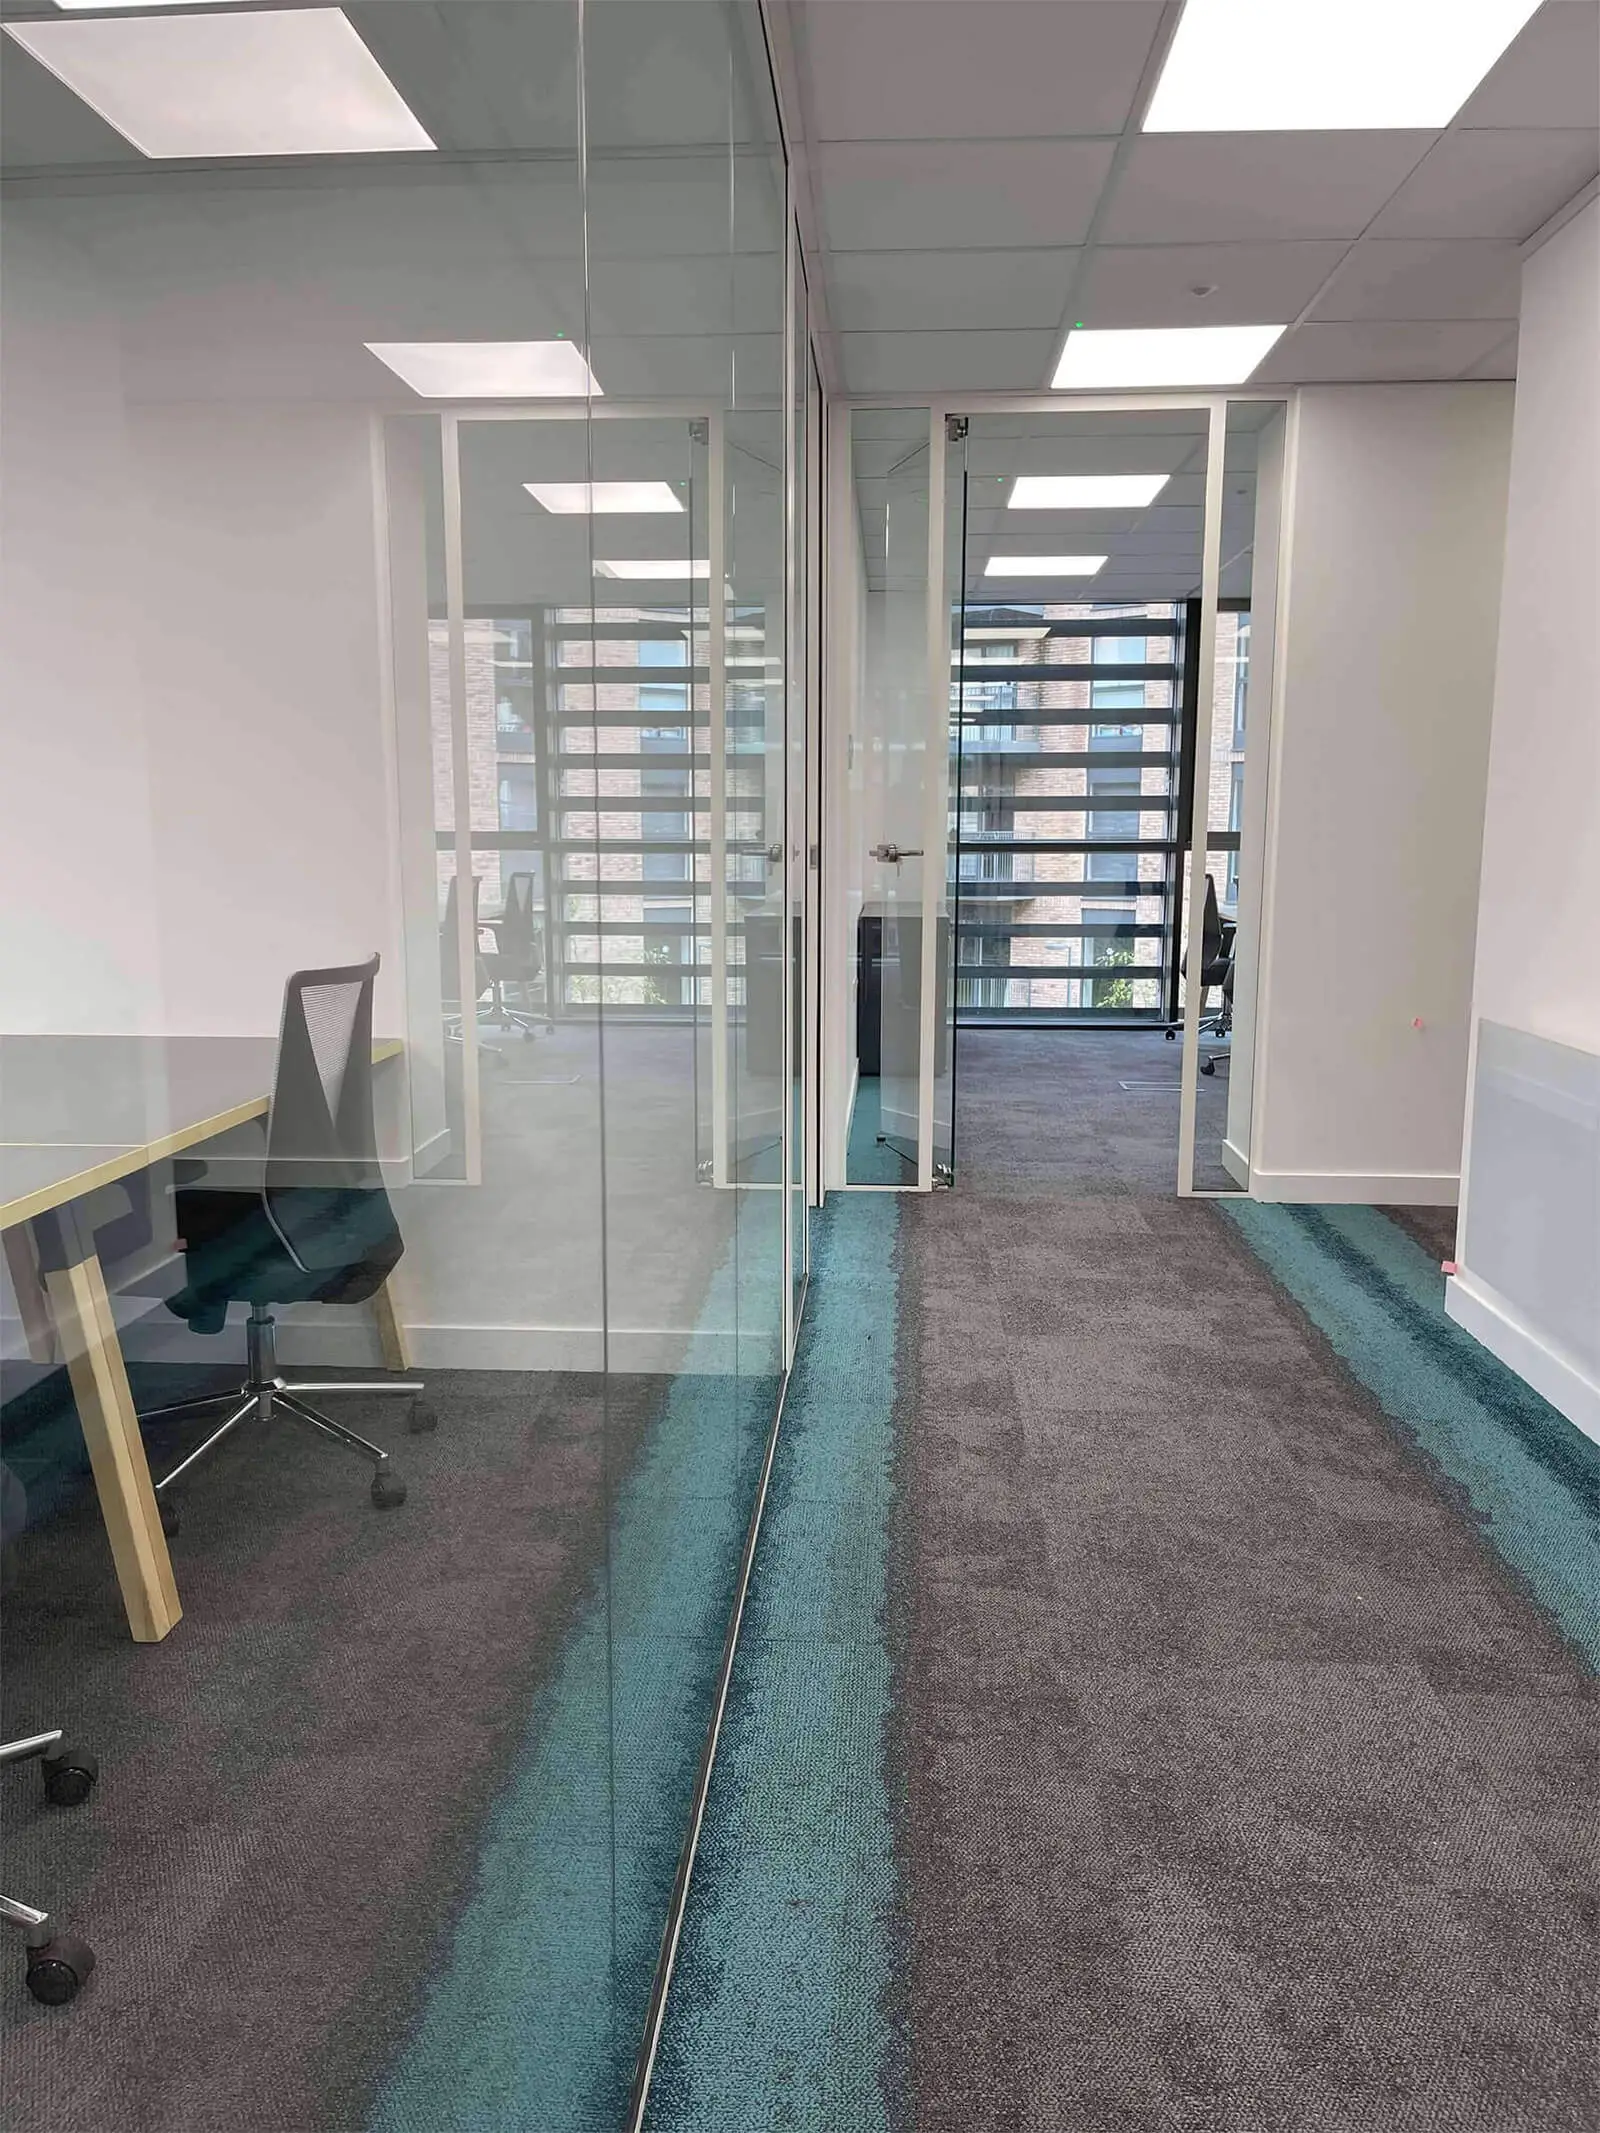 Glass walls seperated meeting area